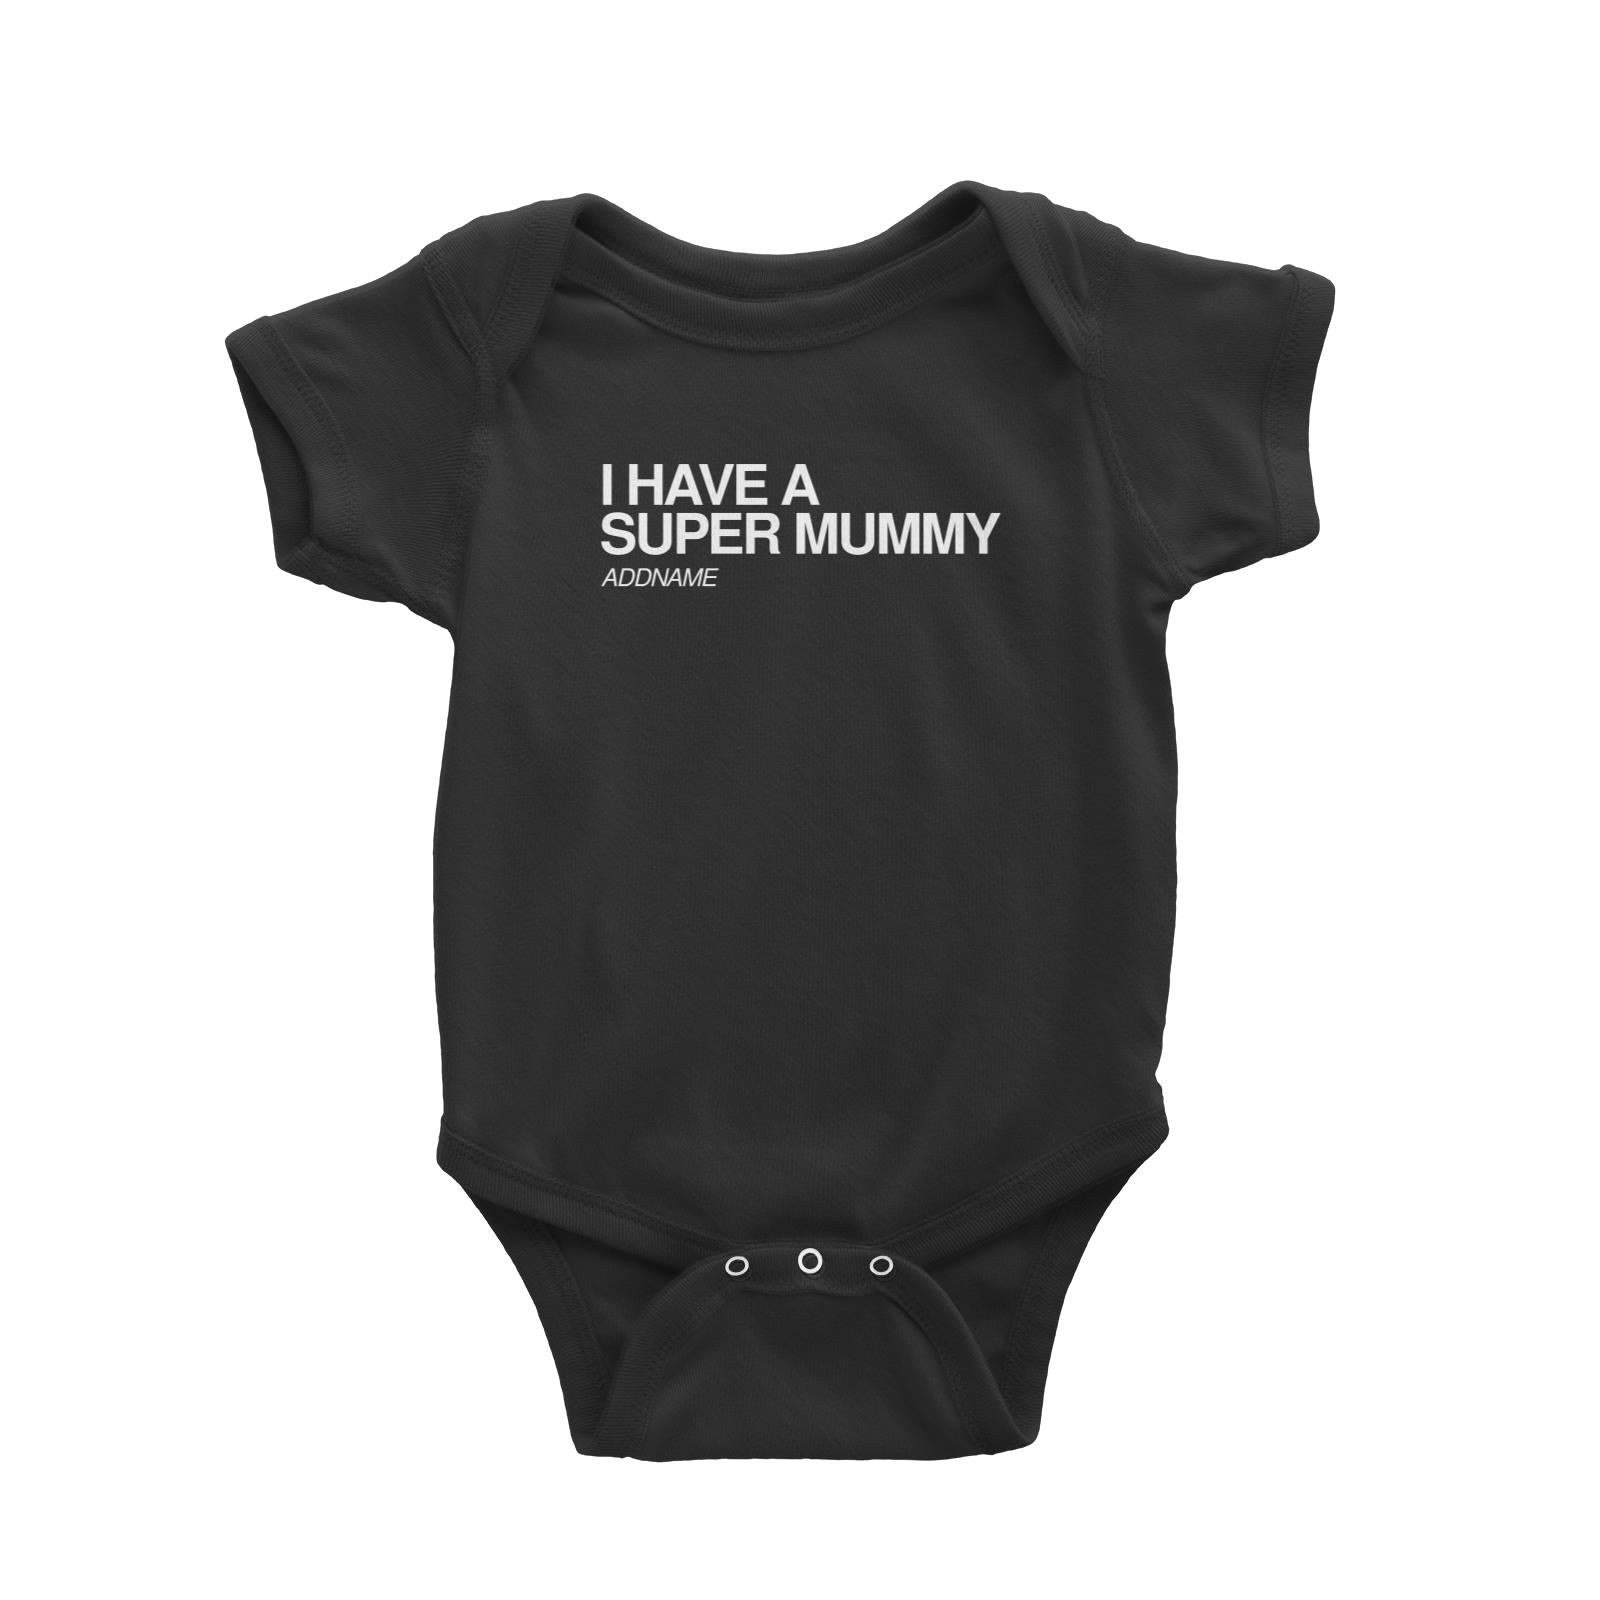 I Have A Super Family I Have A Super Mummy Addname Baby Romper